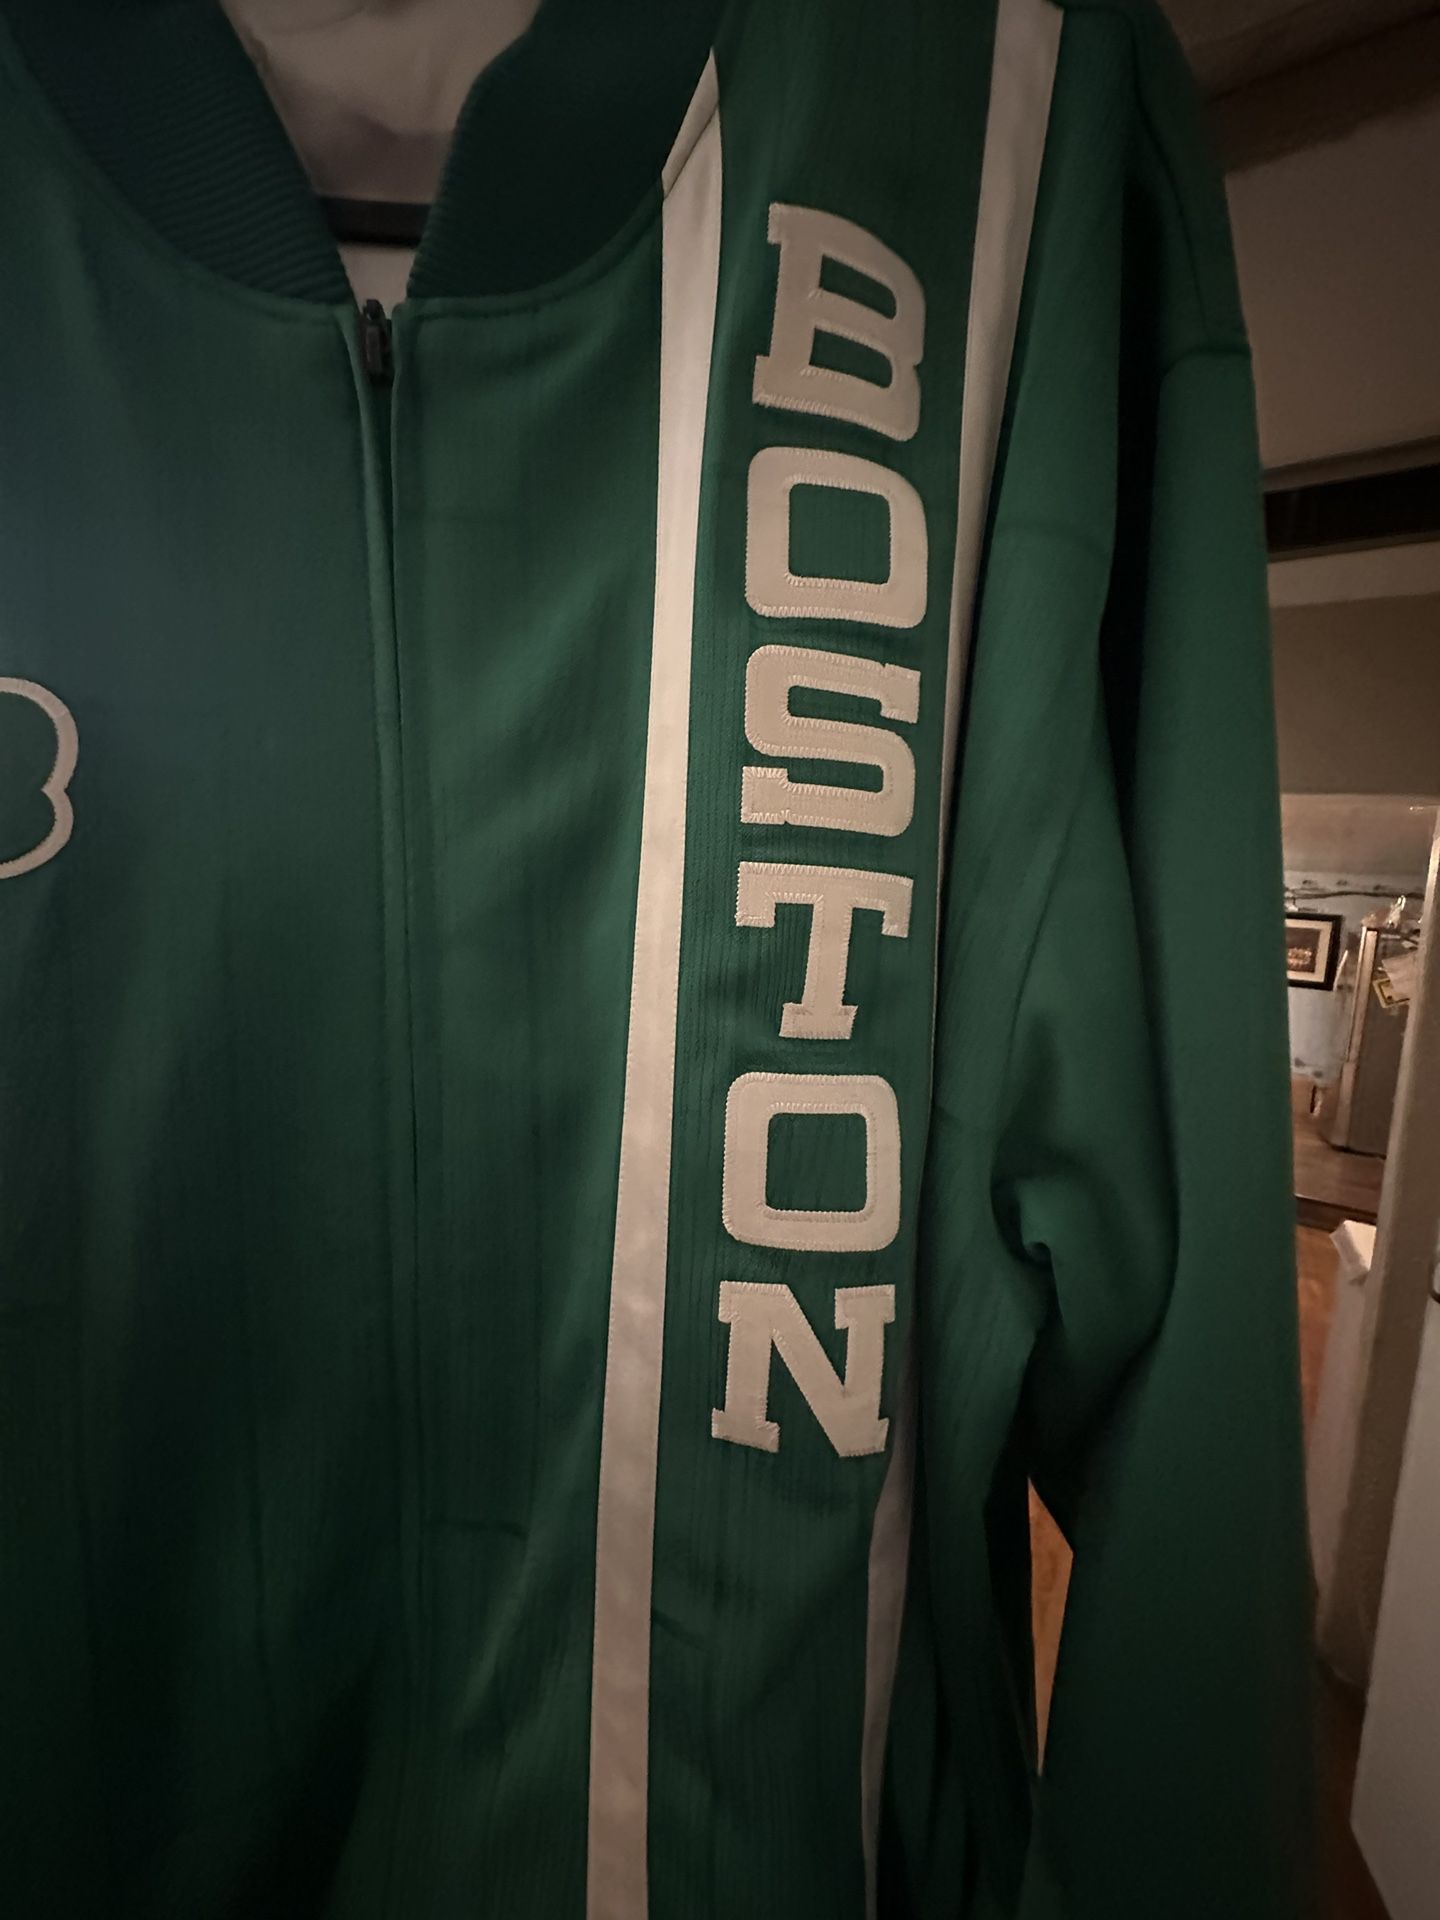 Mitchell & Ness Men's Boston Celtics Hoodie for Sale in Ardsley, NY -  OfferUp